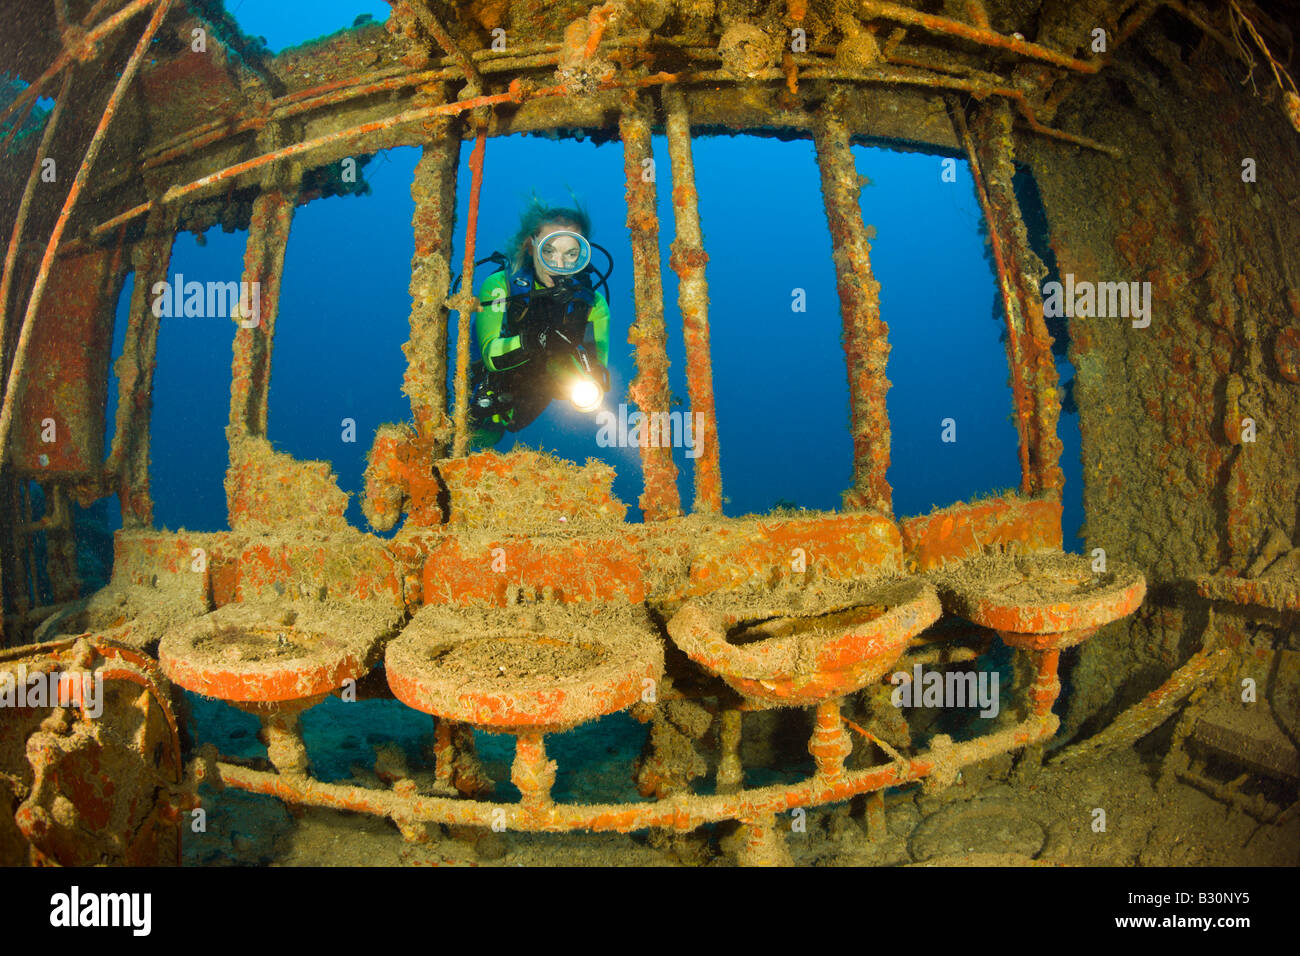 Diver near Lavatory with Sinks at Destroyer USS Lamson Marshall Islands Bikini Atoll Micronesia Pacific Ocean Stock Photo